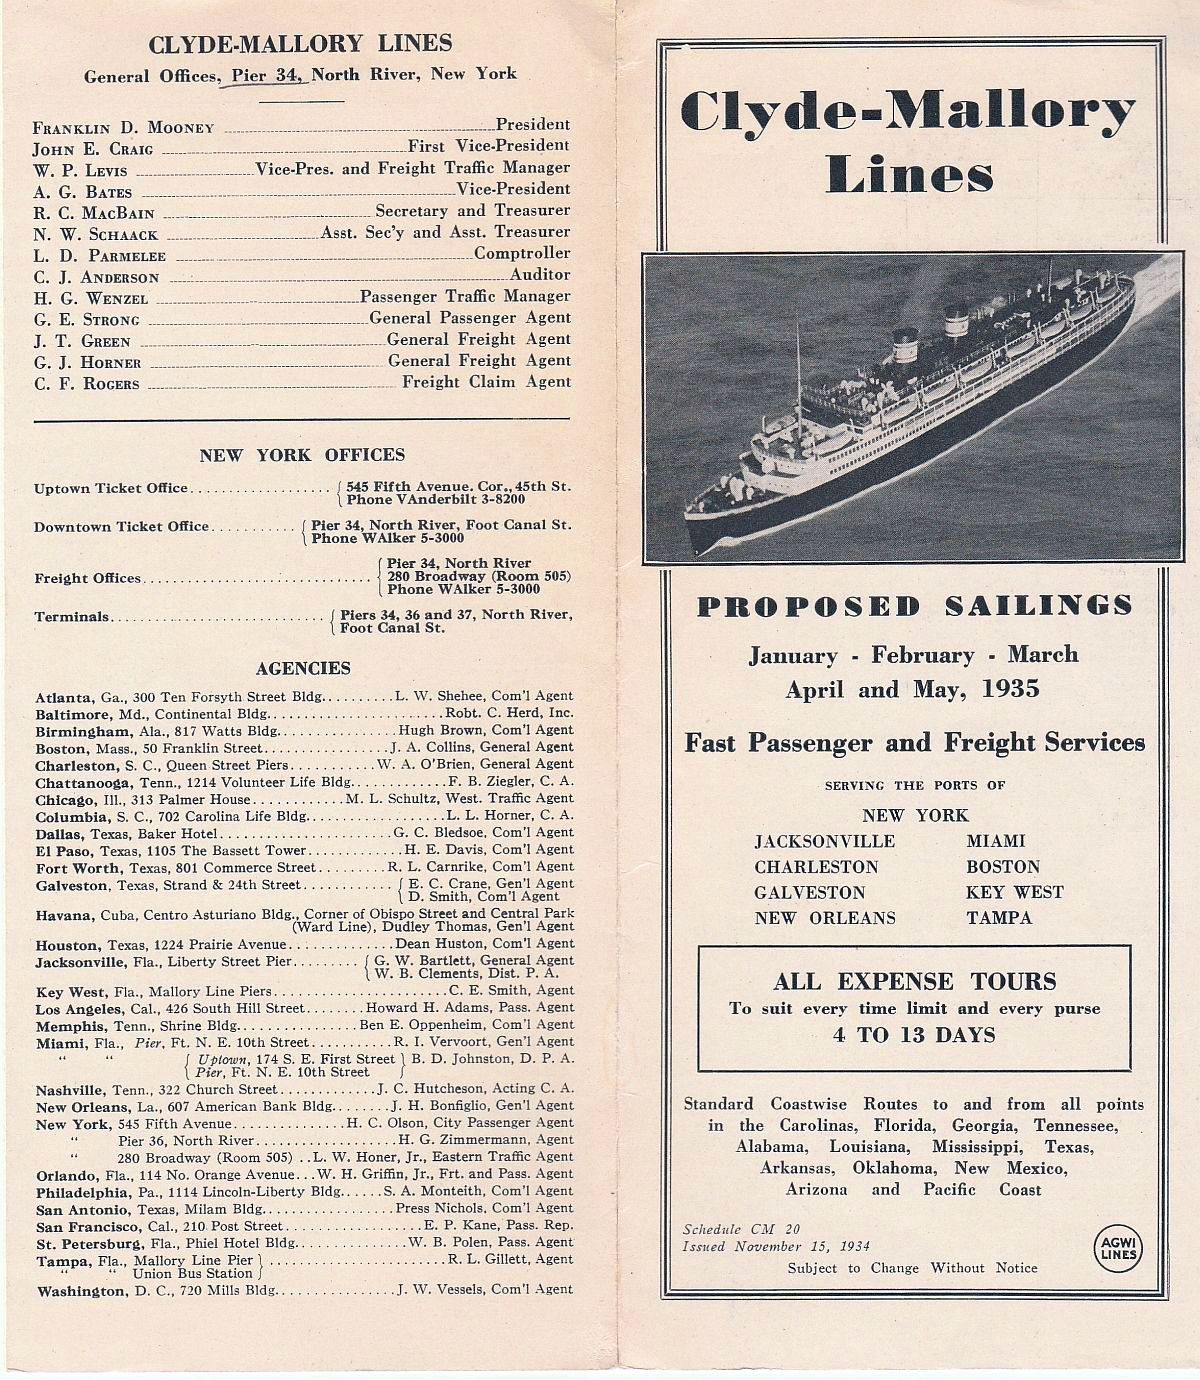 Clyde-Mallory Lines Sailing Schedule cover: Proposed sailings - January to May, 1935 / offices and agencies